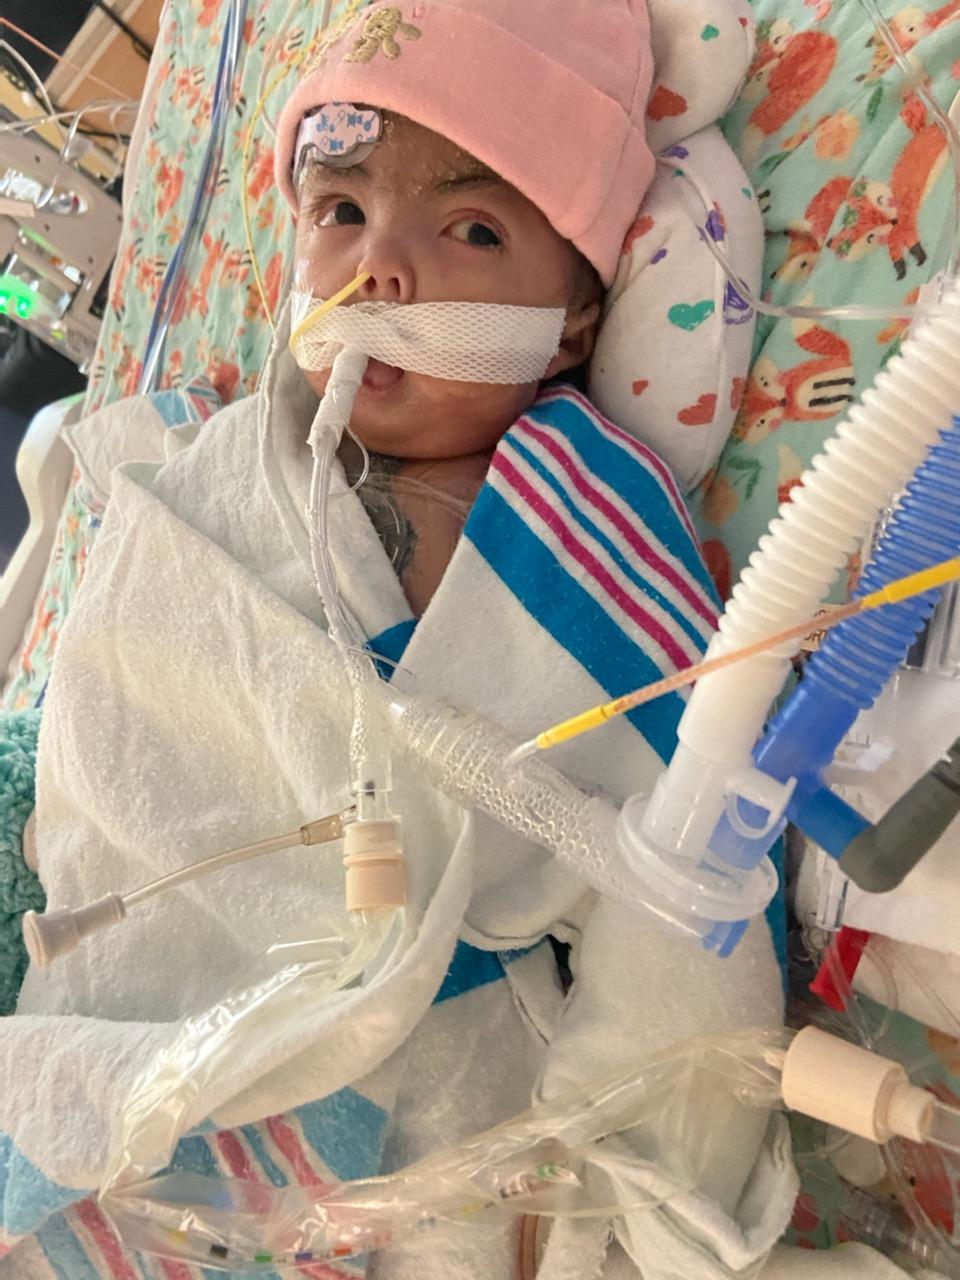 Baby connected to ventilator and monitoring devices.